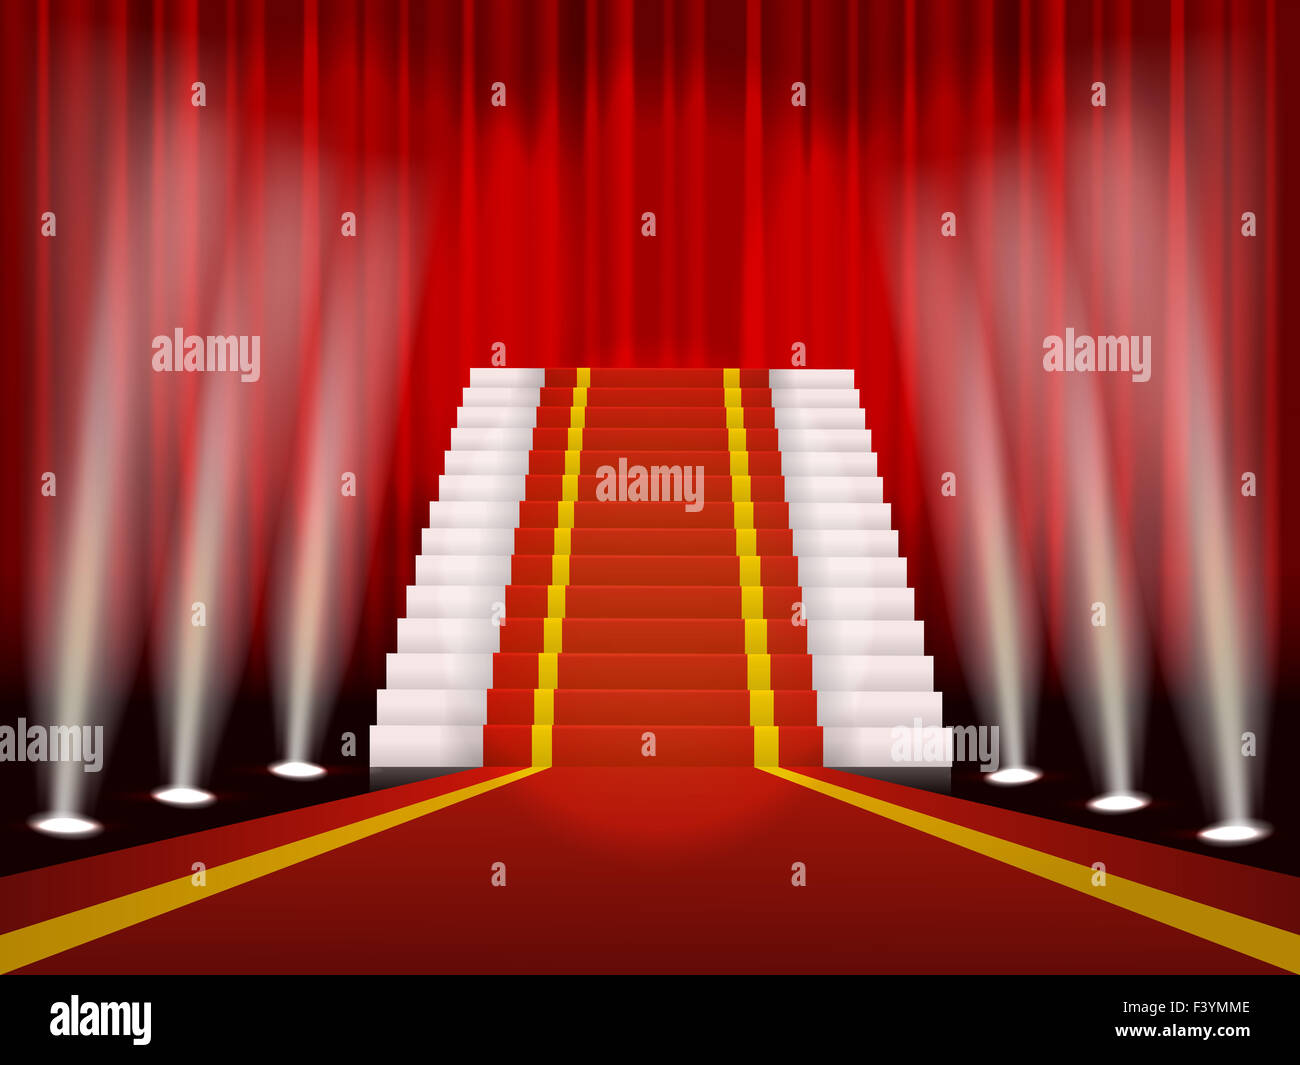 Red carpet and stair for rewarding ceremony Stock Photo